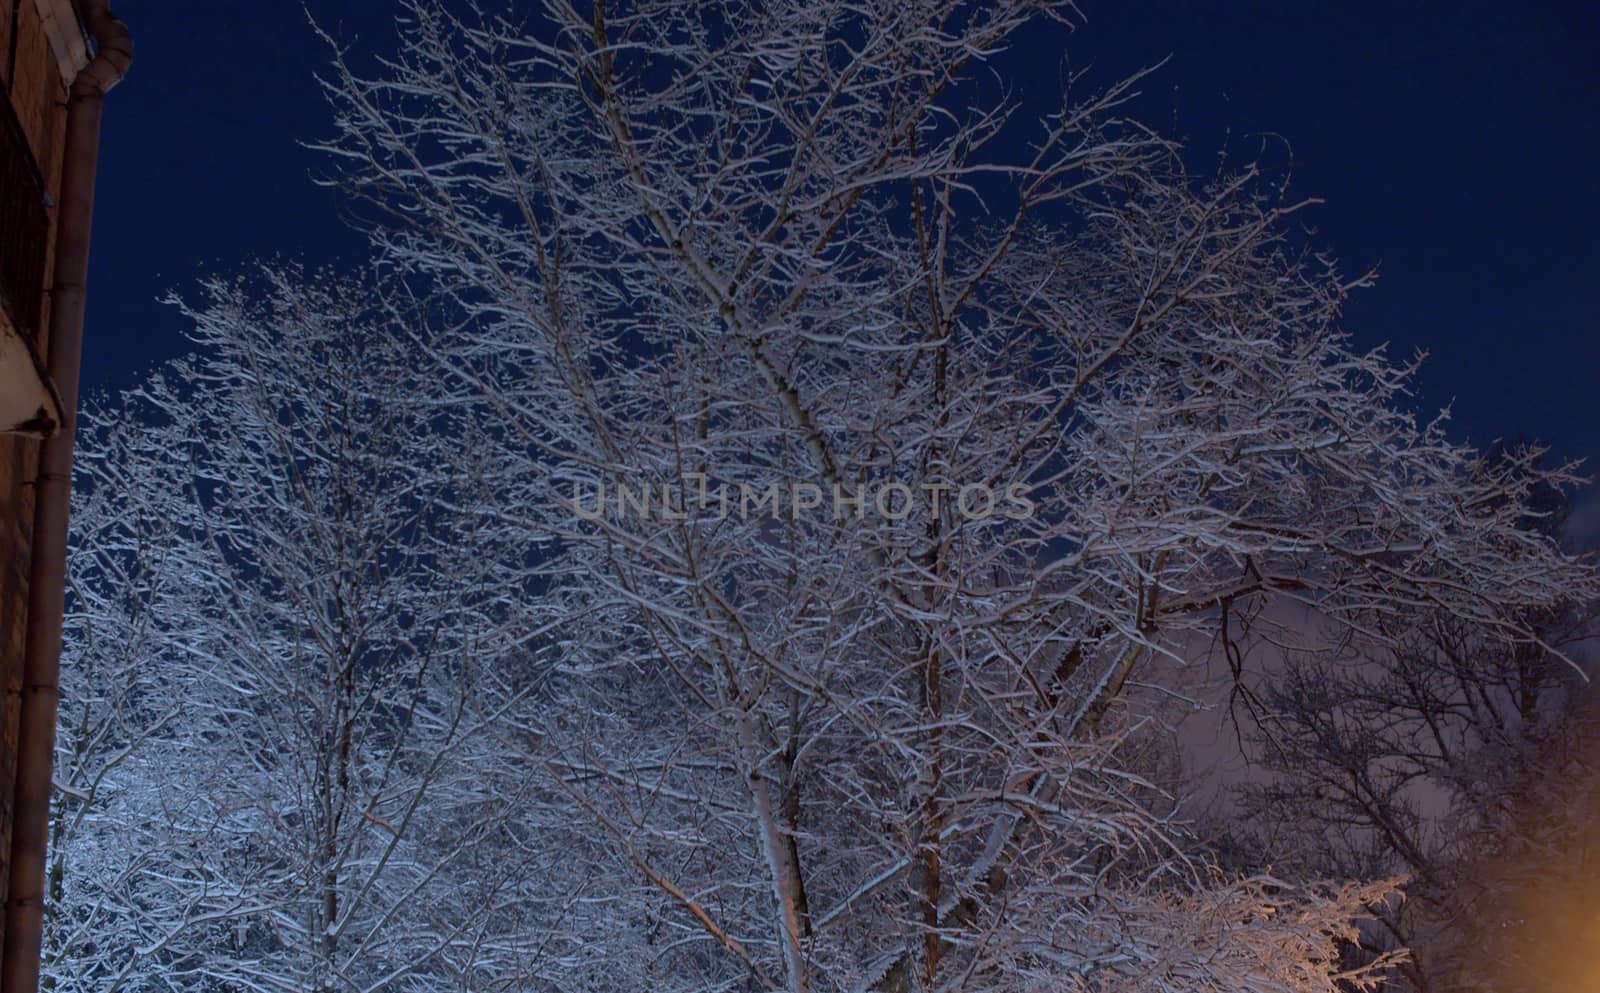 White snow covered tree against the deep blue evening sky. Snow shining in the light of lanterns